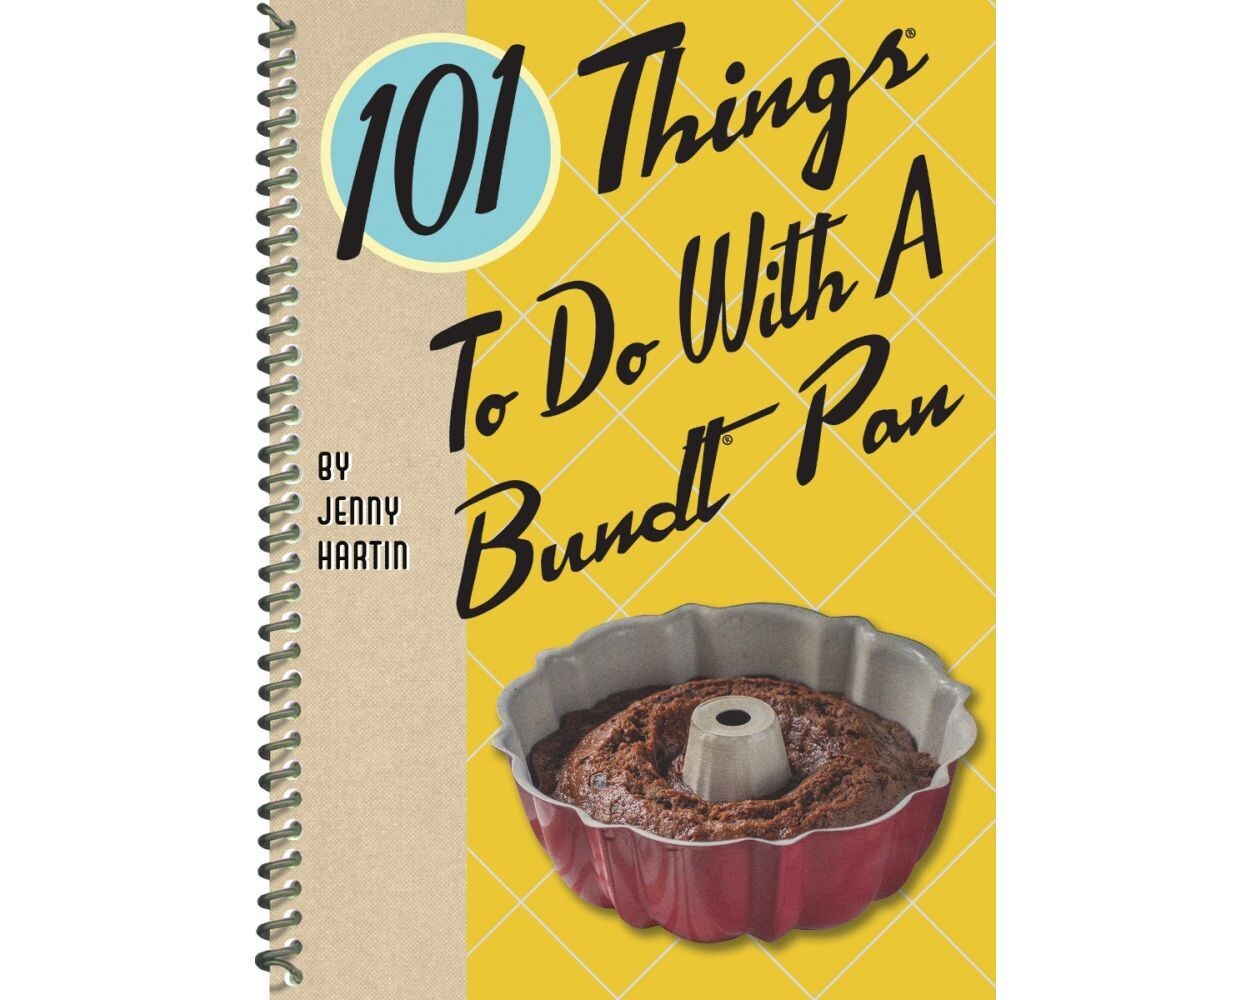 GSP 101 Things To Do With A Bundt Pan